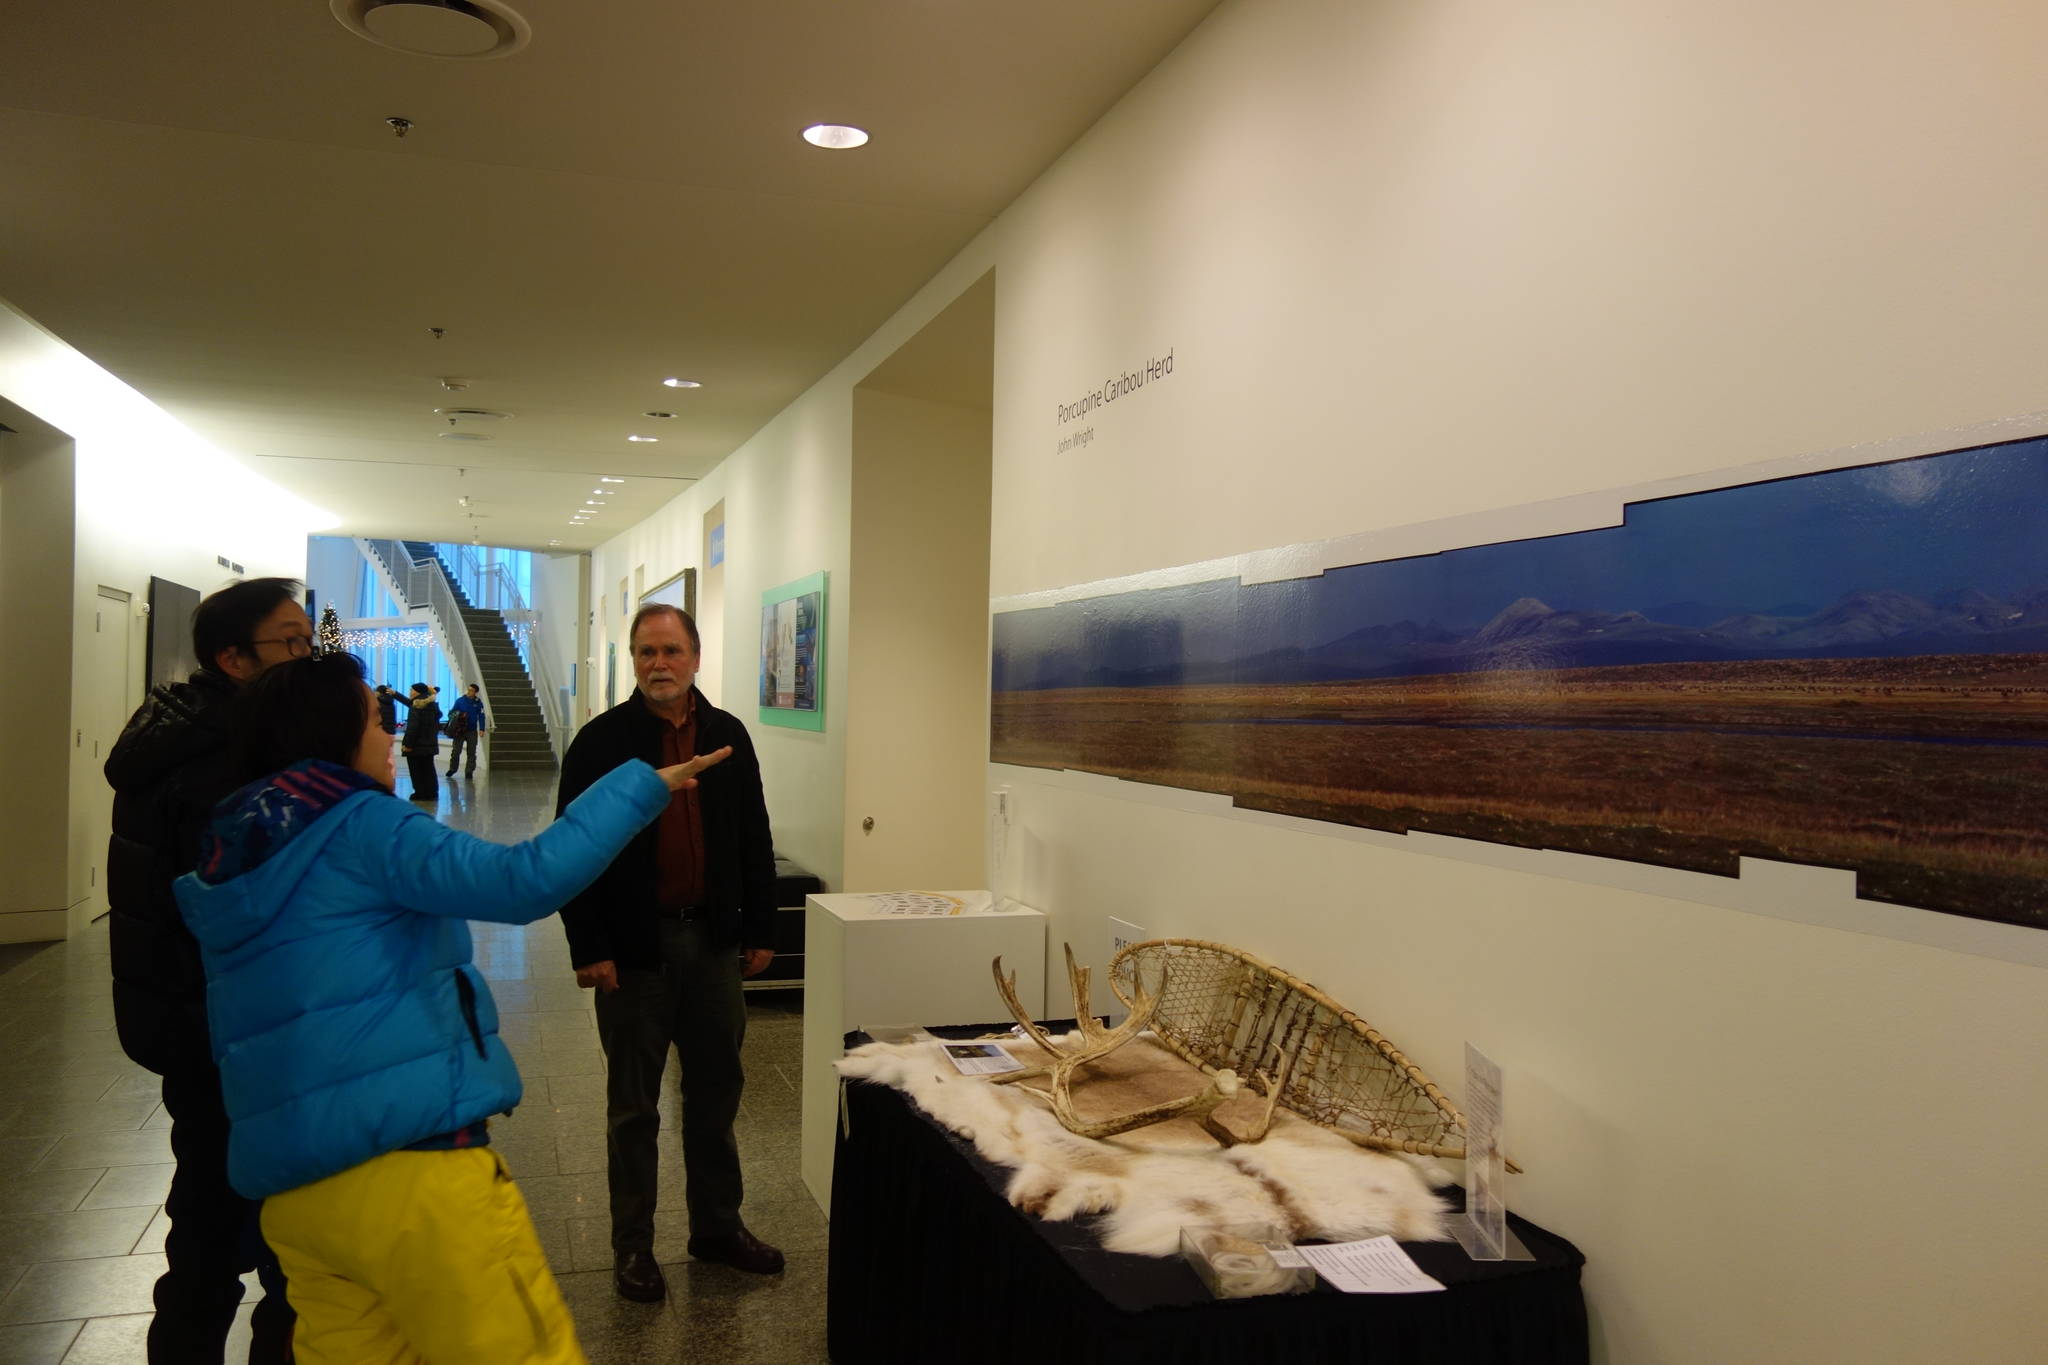 John Wright stands next to his 1979 panoramic photo of the Porcupine caribou herd in the University of Alaska Museum of the North. (Photo by Ned Rozell)